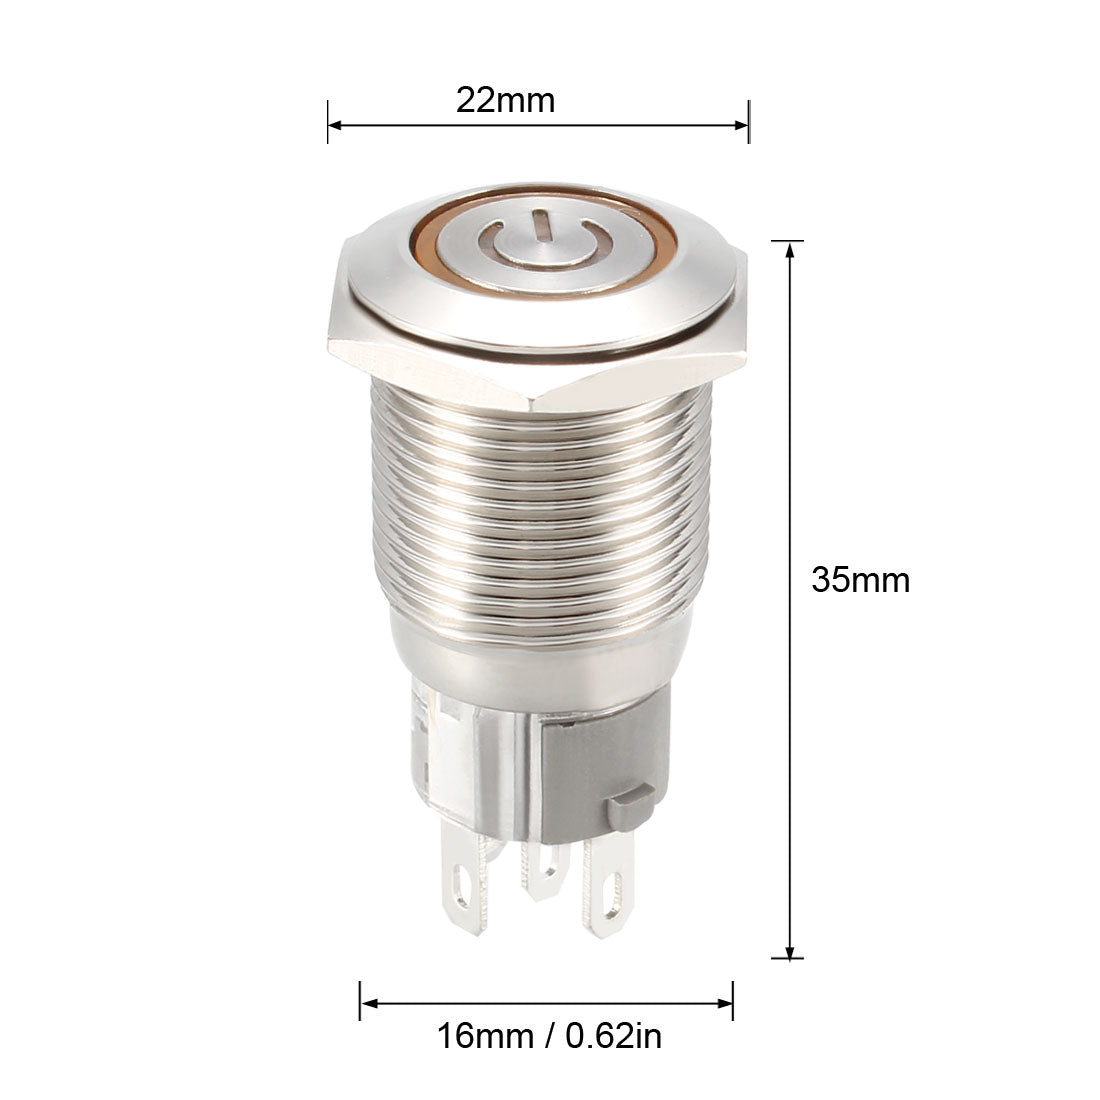 uxcell Uxcell Momentary Metal Push Button Switch 16mm Mounting 1NC NO COM 12V LED with Socket Plug